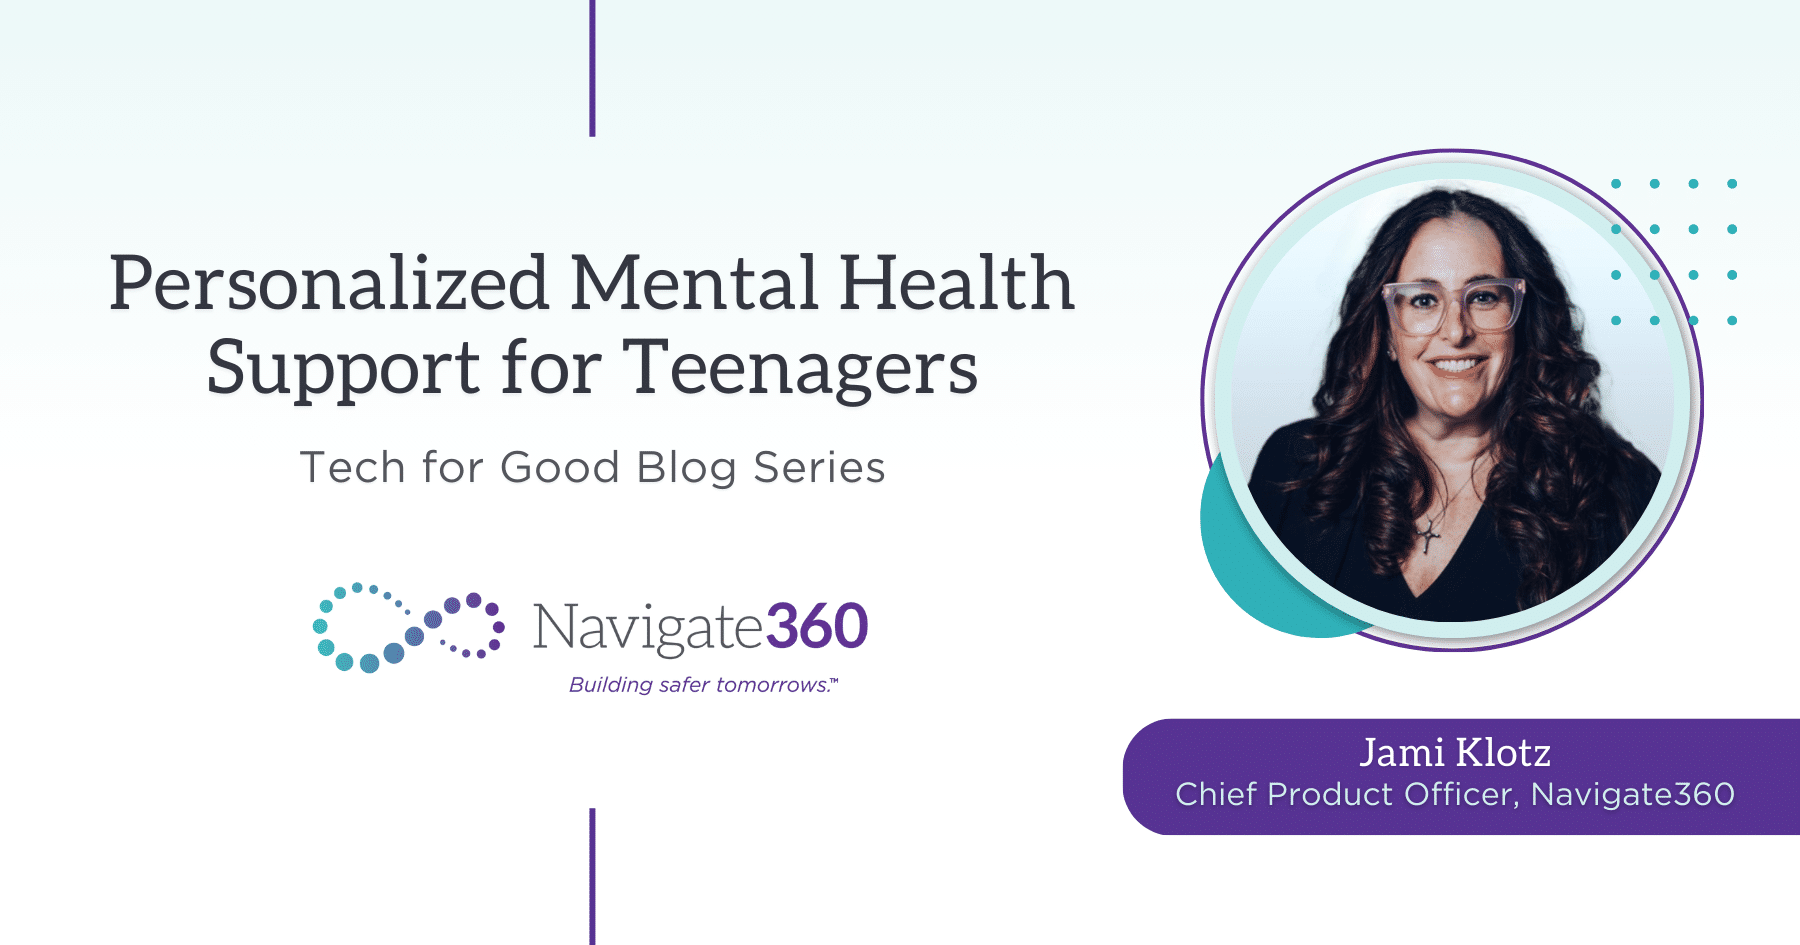 Personalized Mental Health Support for Teenagers